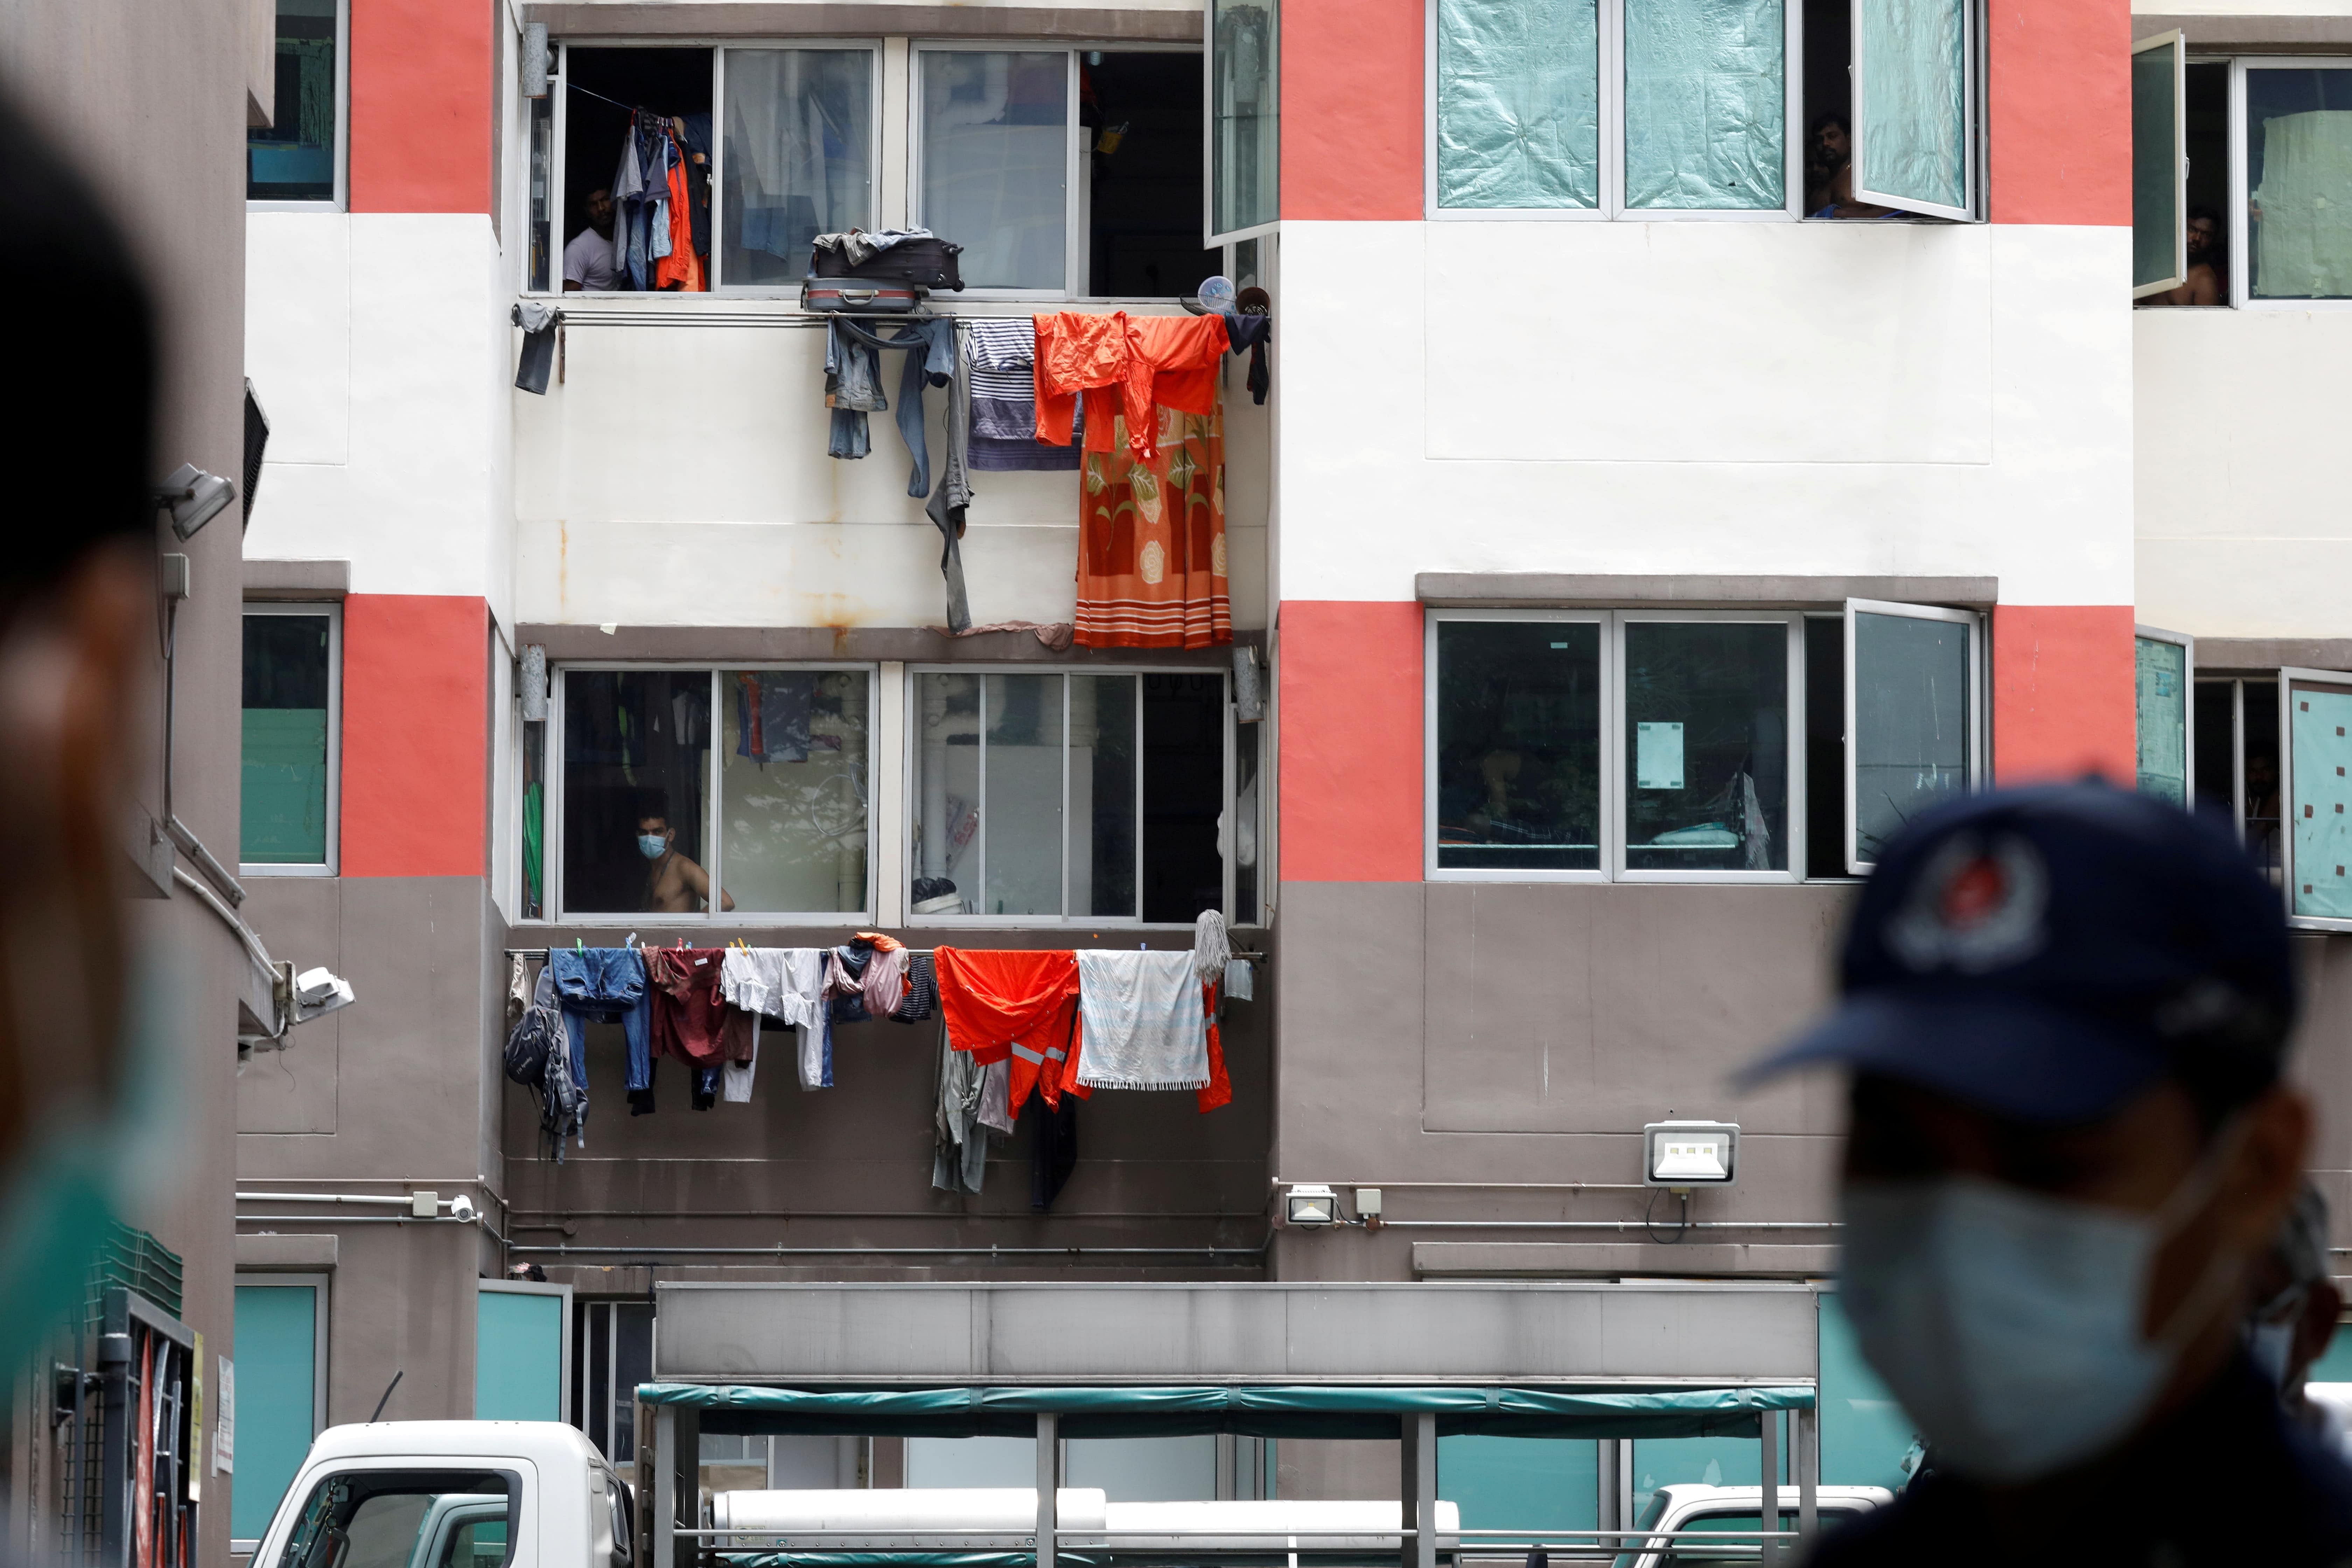 Most of them live together in huge dormitory complexes. (Credit: Reuters Photo)